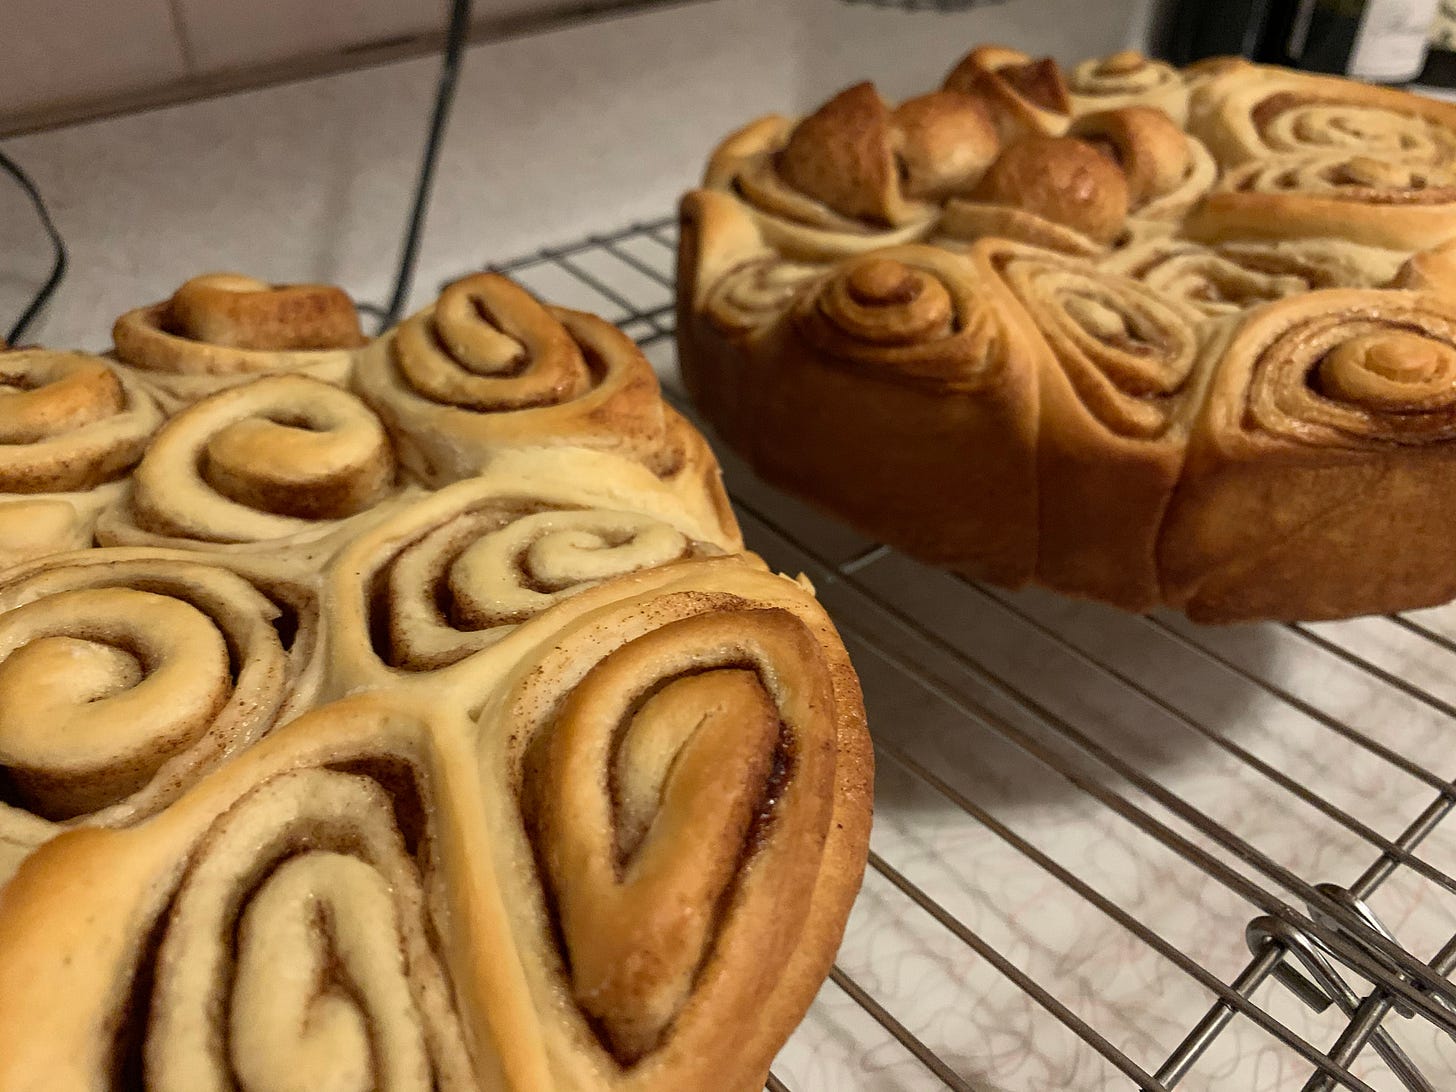 An image of two rounds of un-iced cinnamon rolls